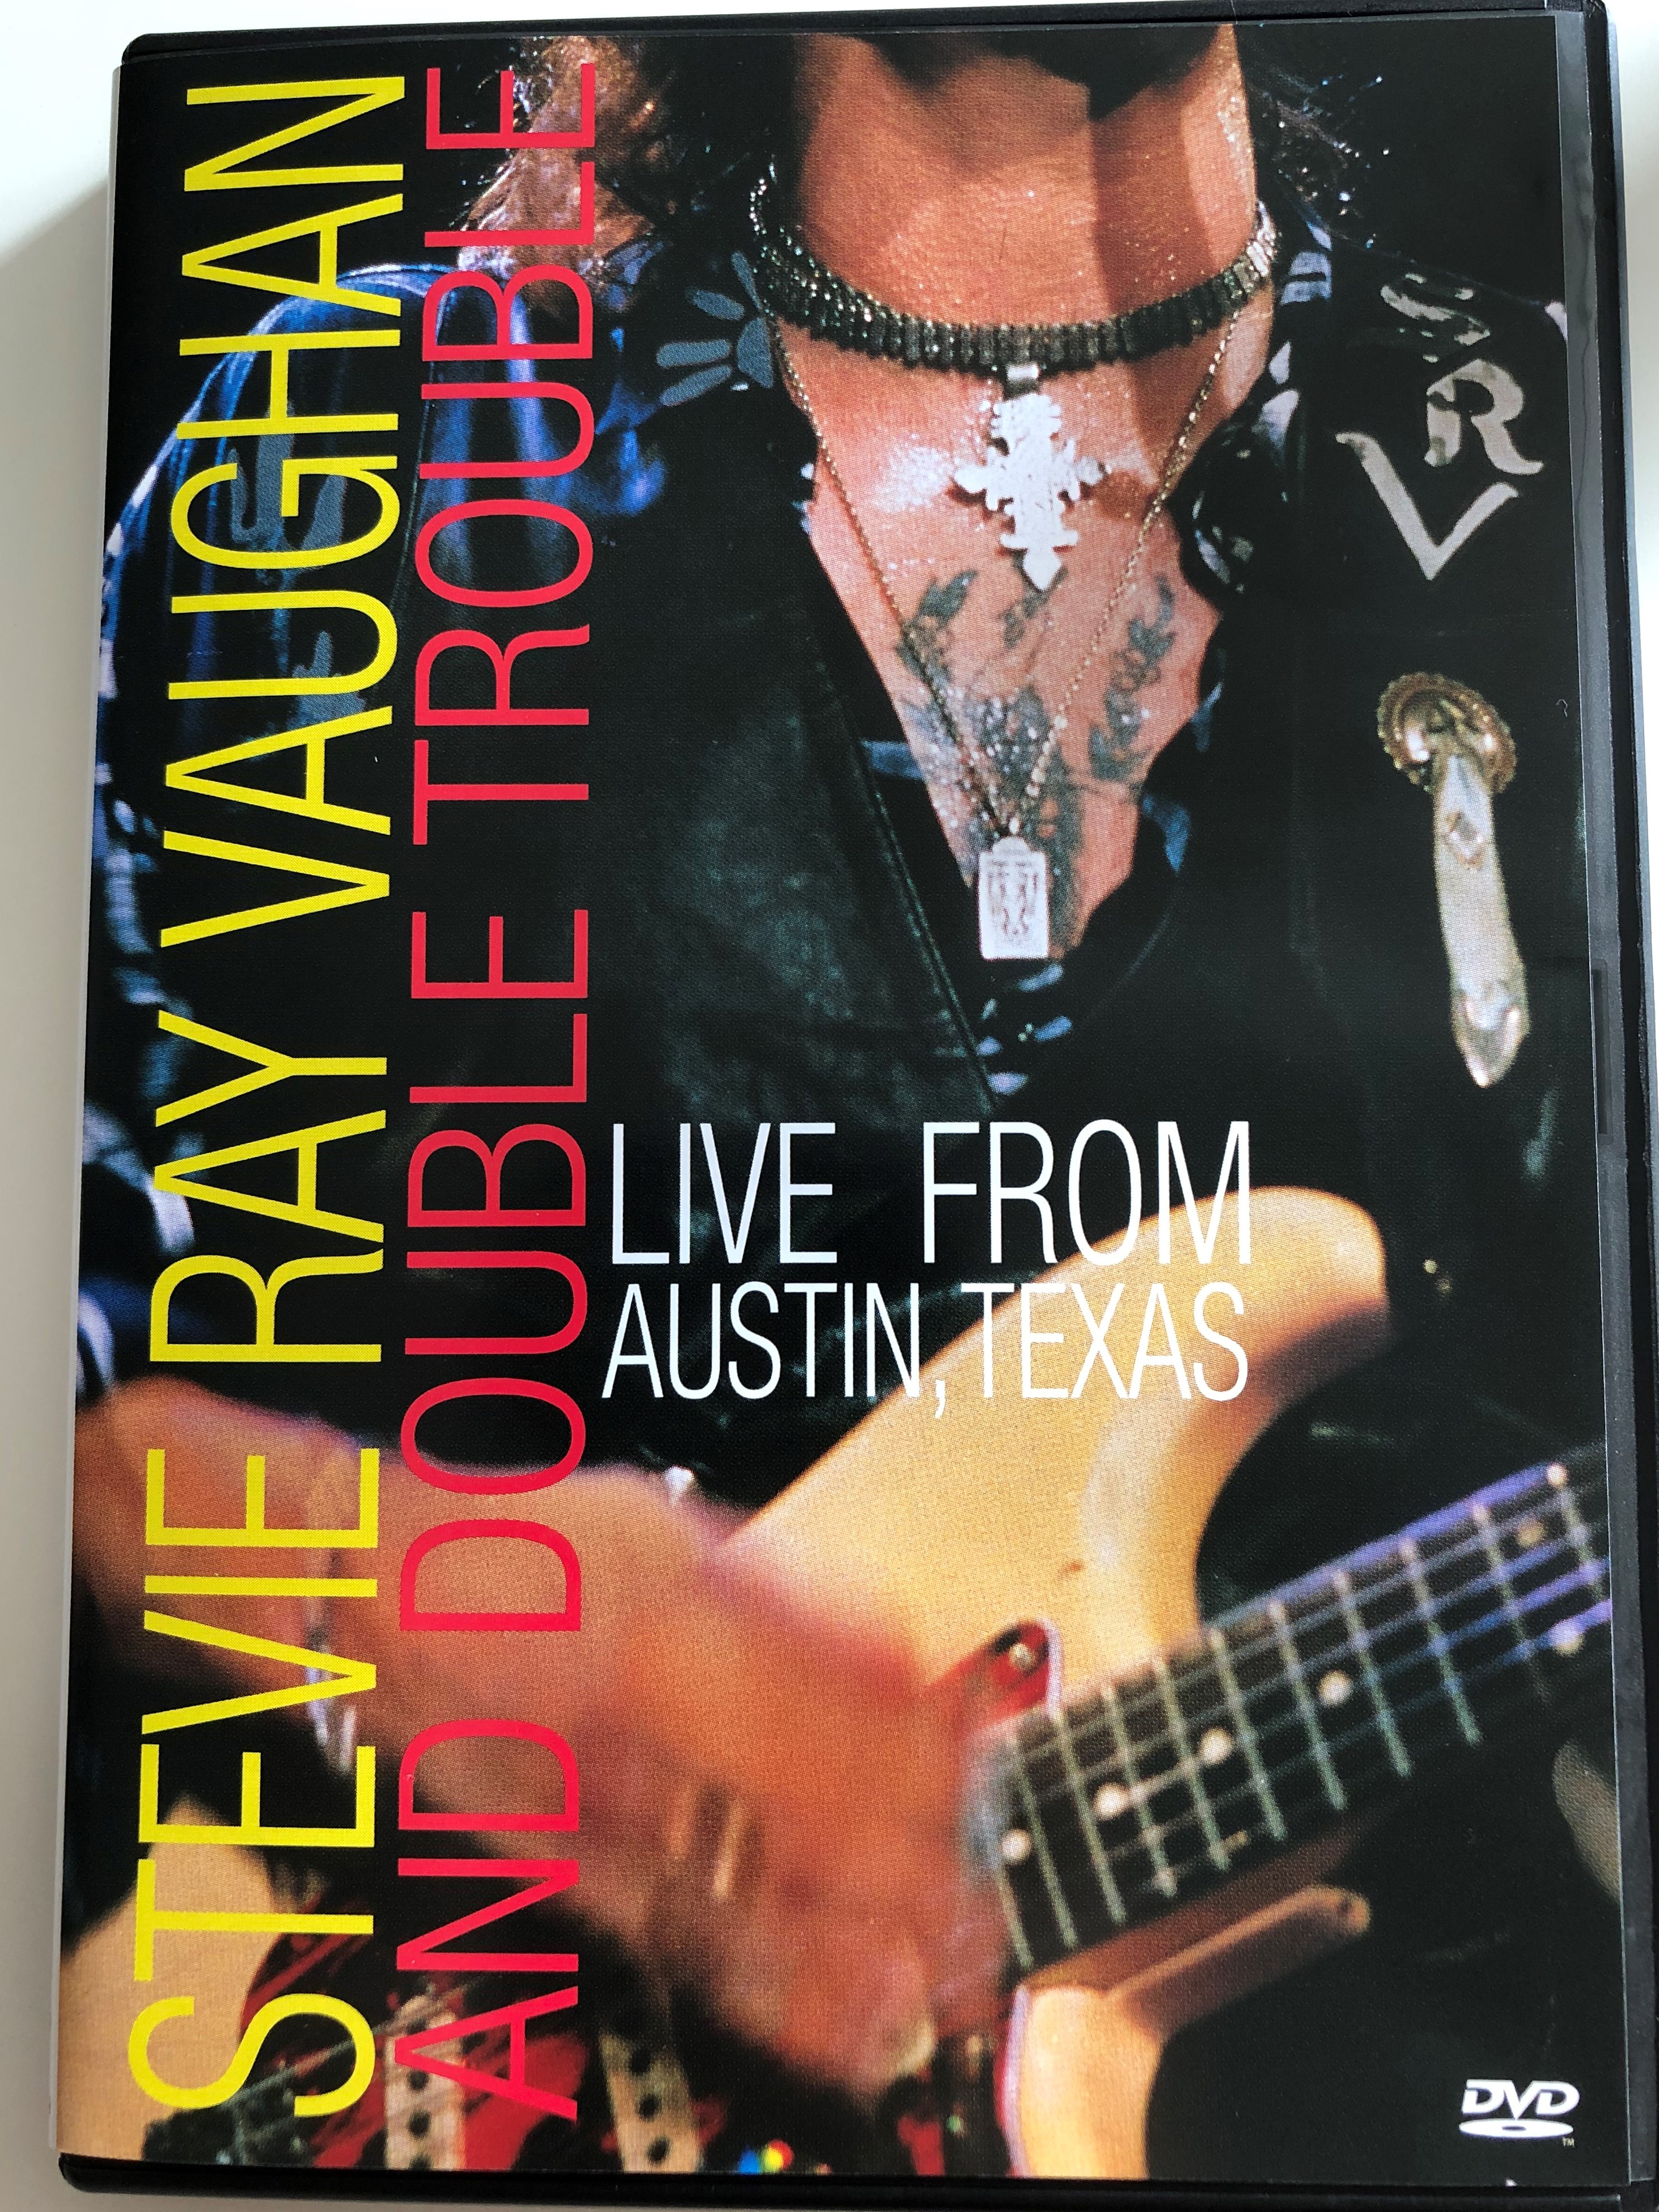 stevie-ray-vaughan-and-double-trouble-dvd-1995-live-from-austin-texas-directed-by-gary-menotti-1-.jpg